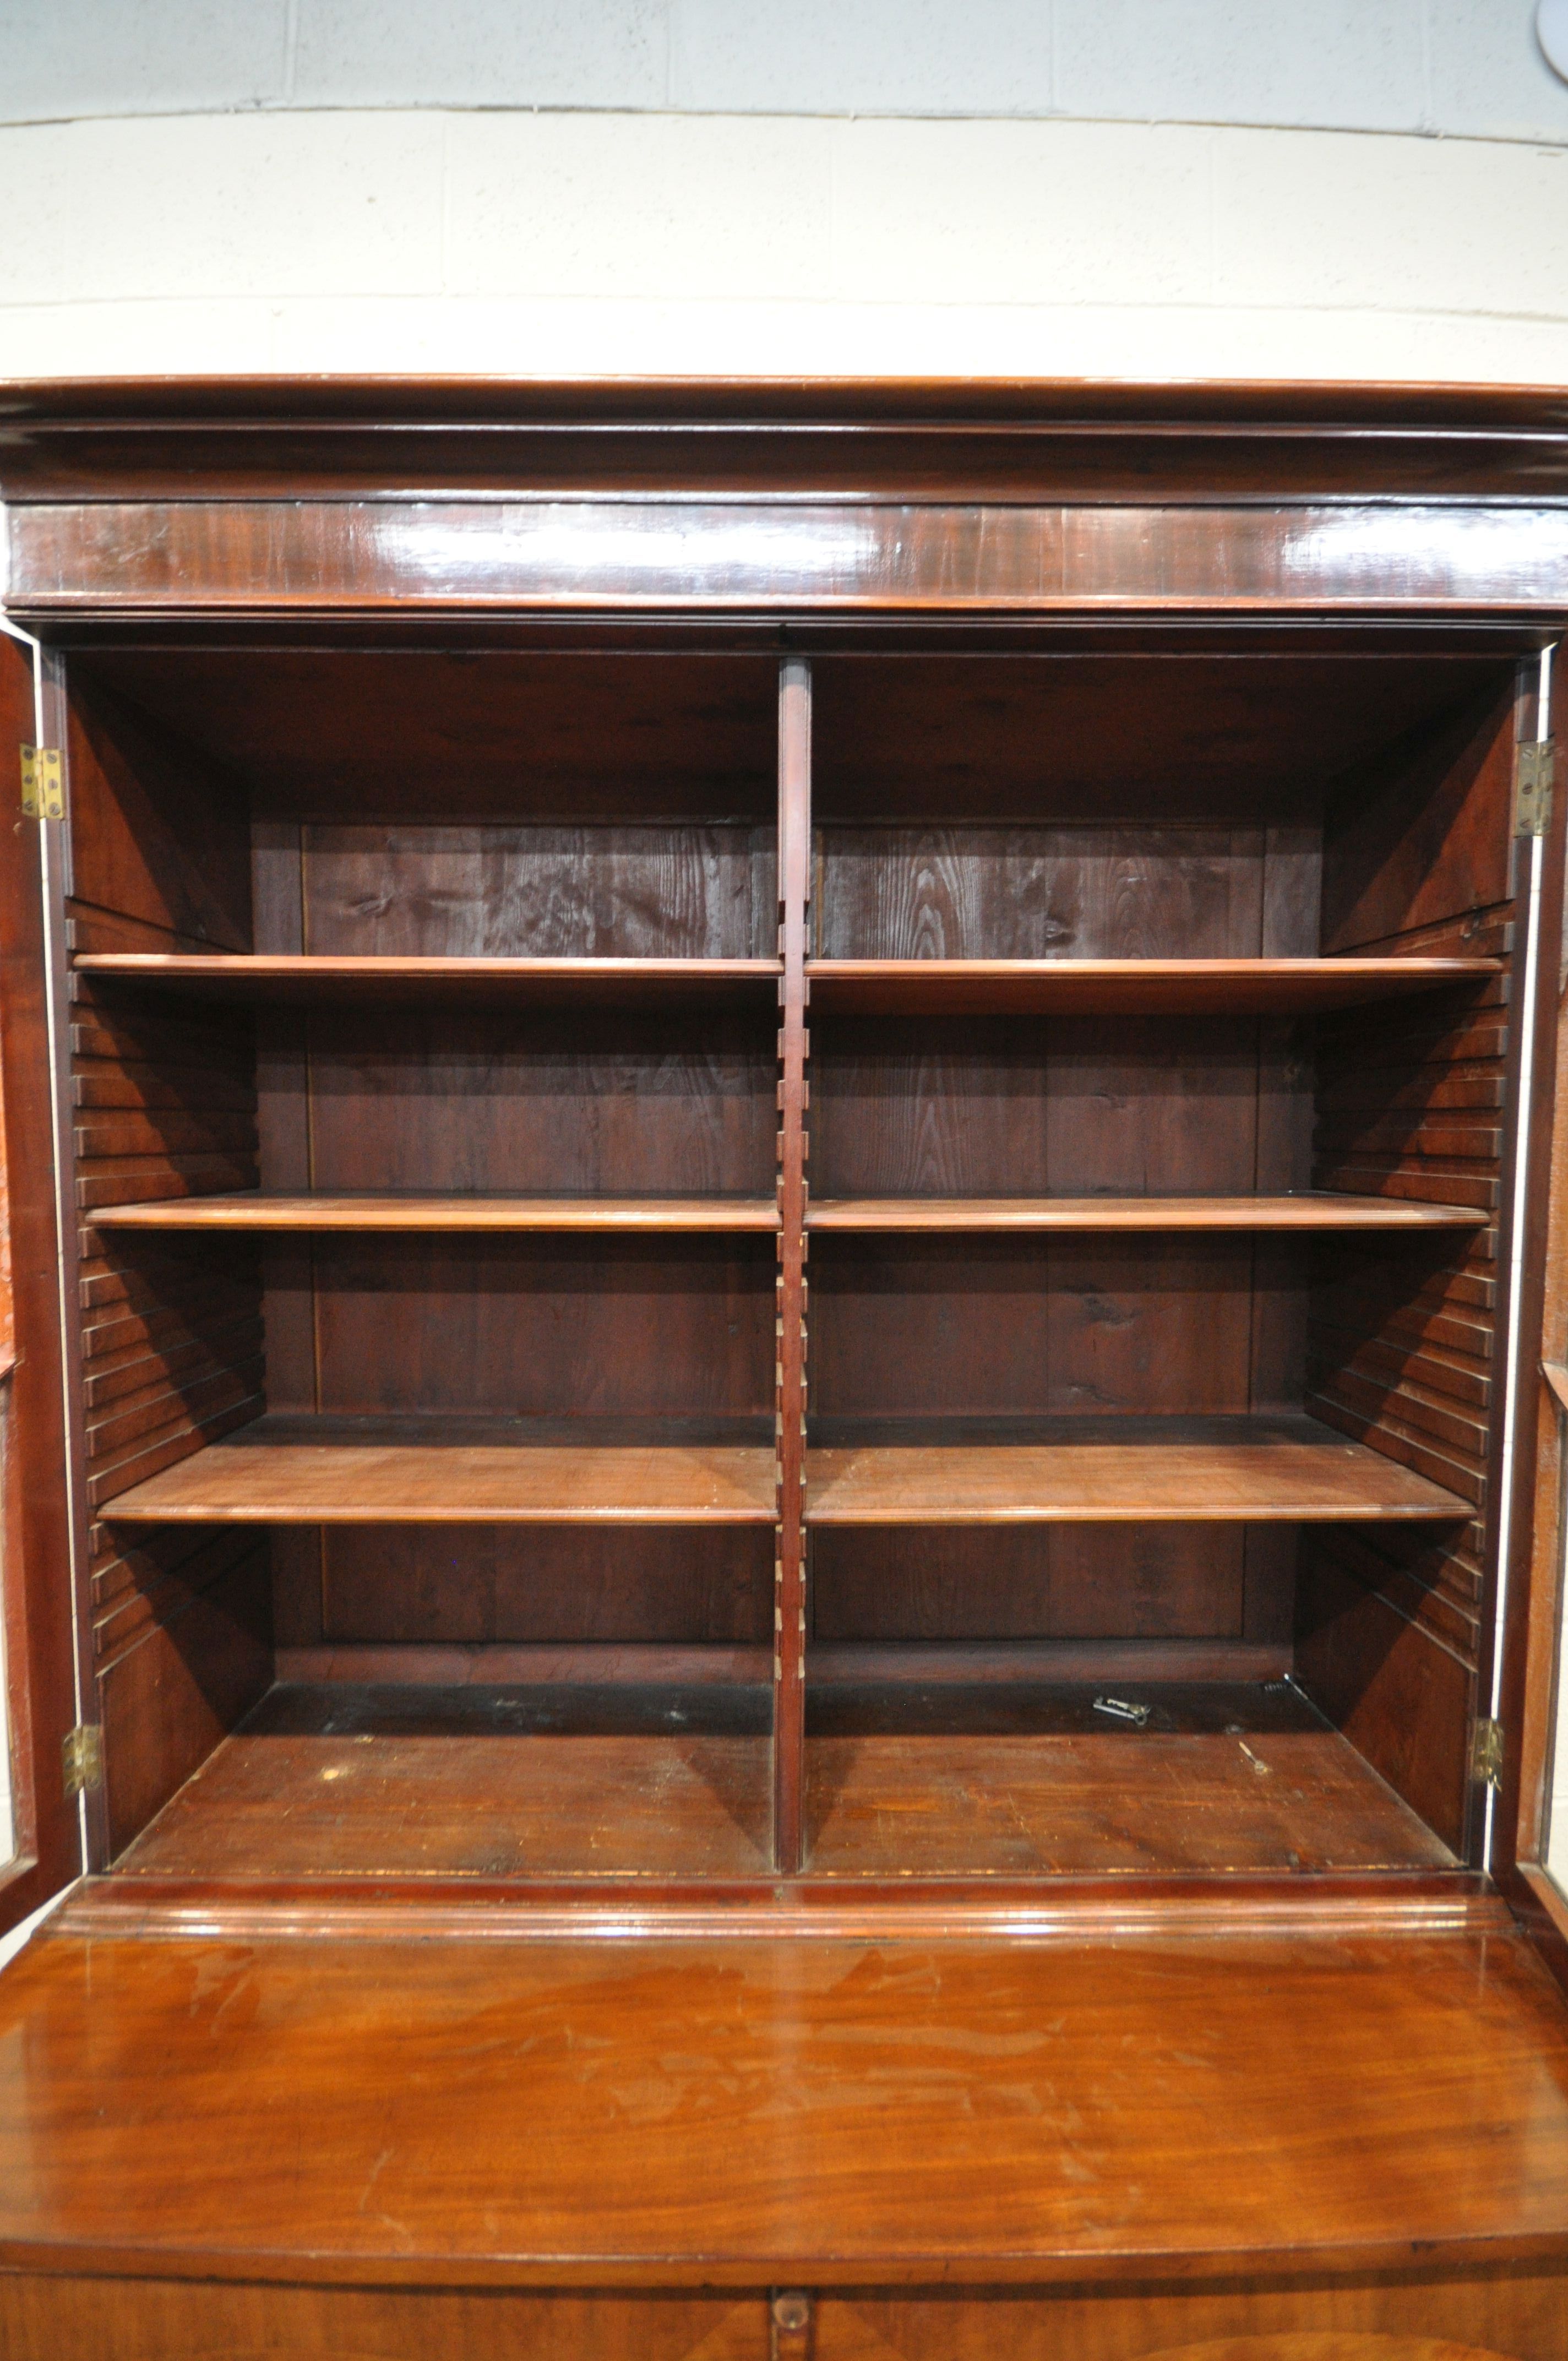 A GEORGE III MAHOGANY SECRETAIRE BOOKCASE, the top with an overhanging cornice, double astragal - Image 6 of 7